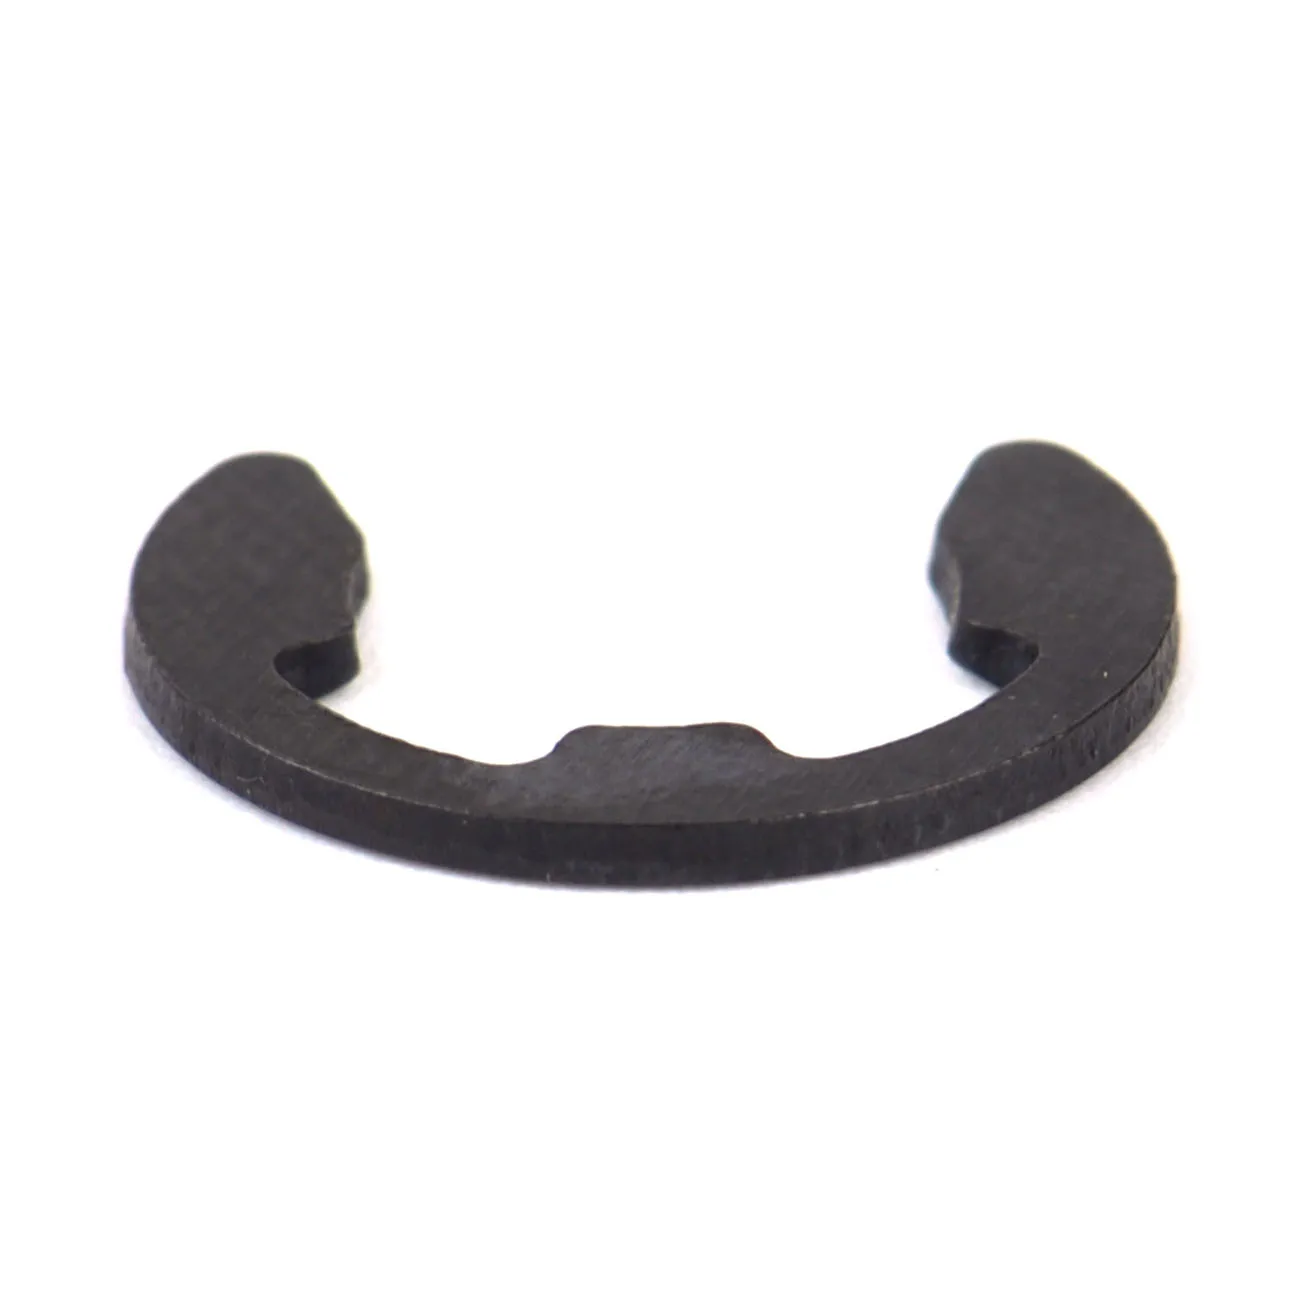 E-Clip (1) 8 x 1.3mm (Clutch) For- STIHL MS170 MS180 017 018 - 025 MS210 MS230 MS250 021 023  Chainsaw Parts 9460 624 0801